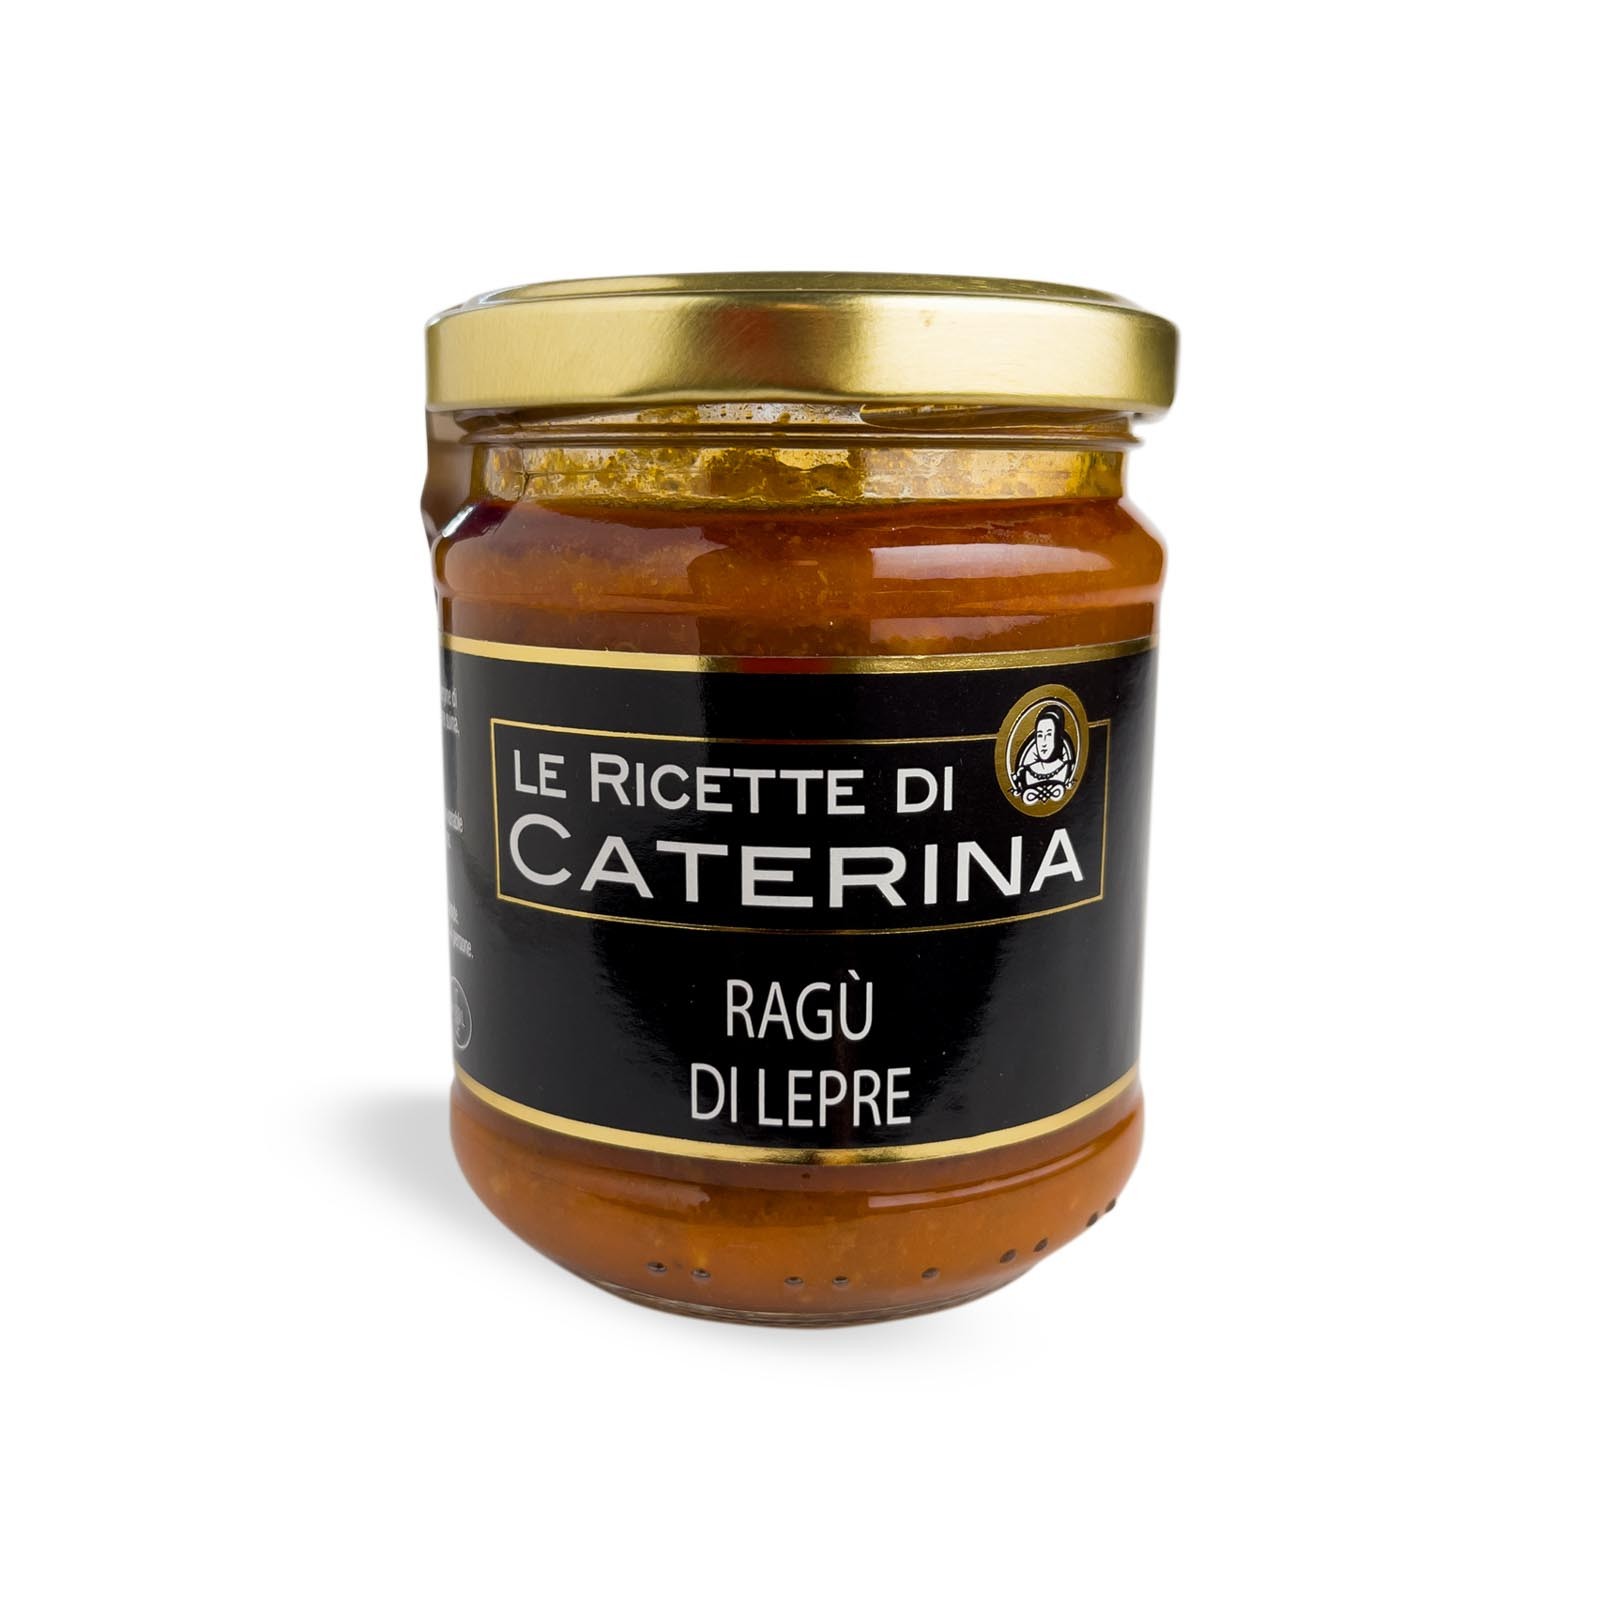 Artisan ragù with hare meat, produced according to an ancient Tuscan recipe.